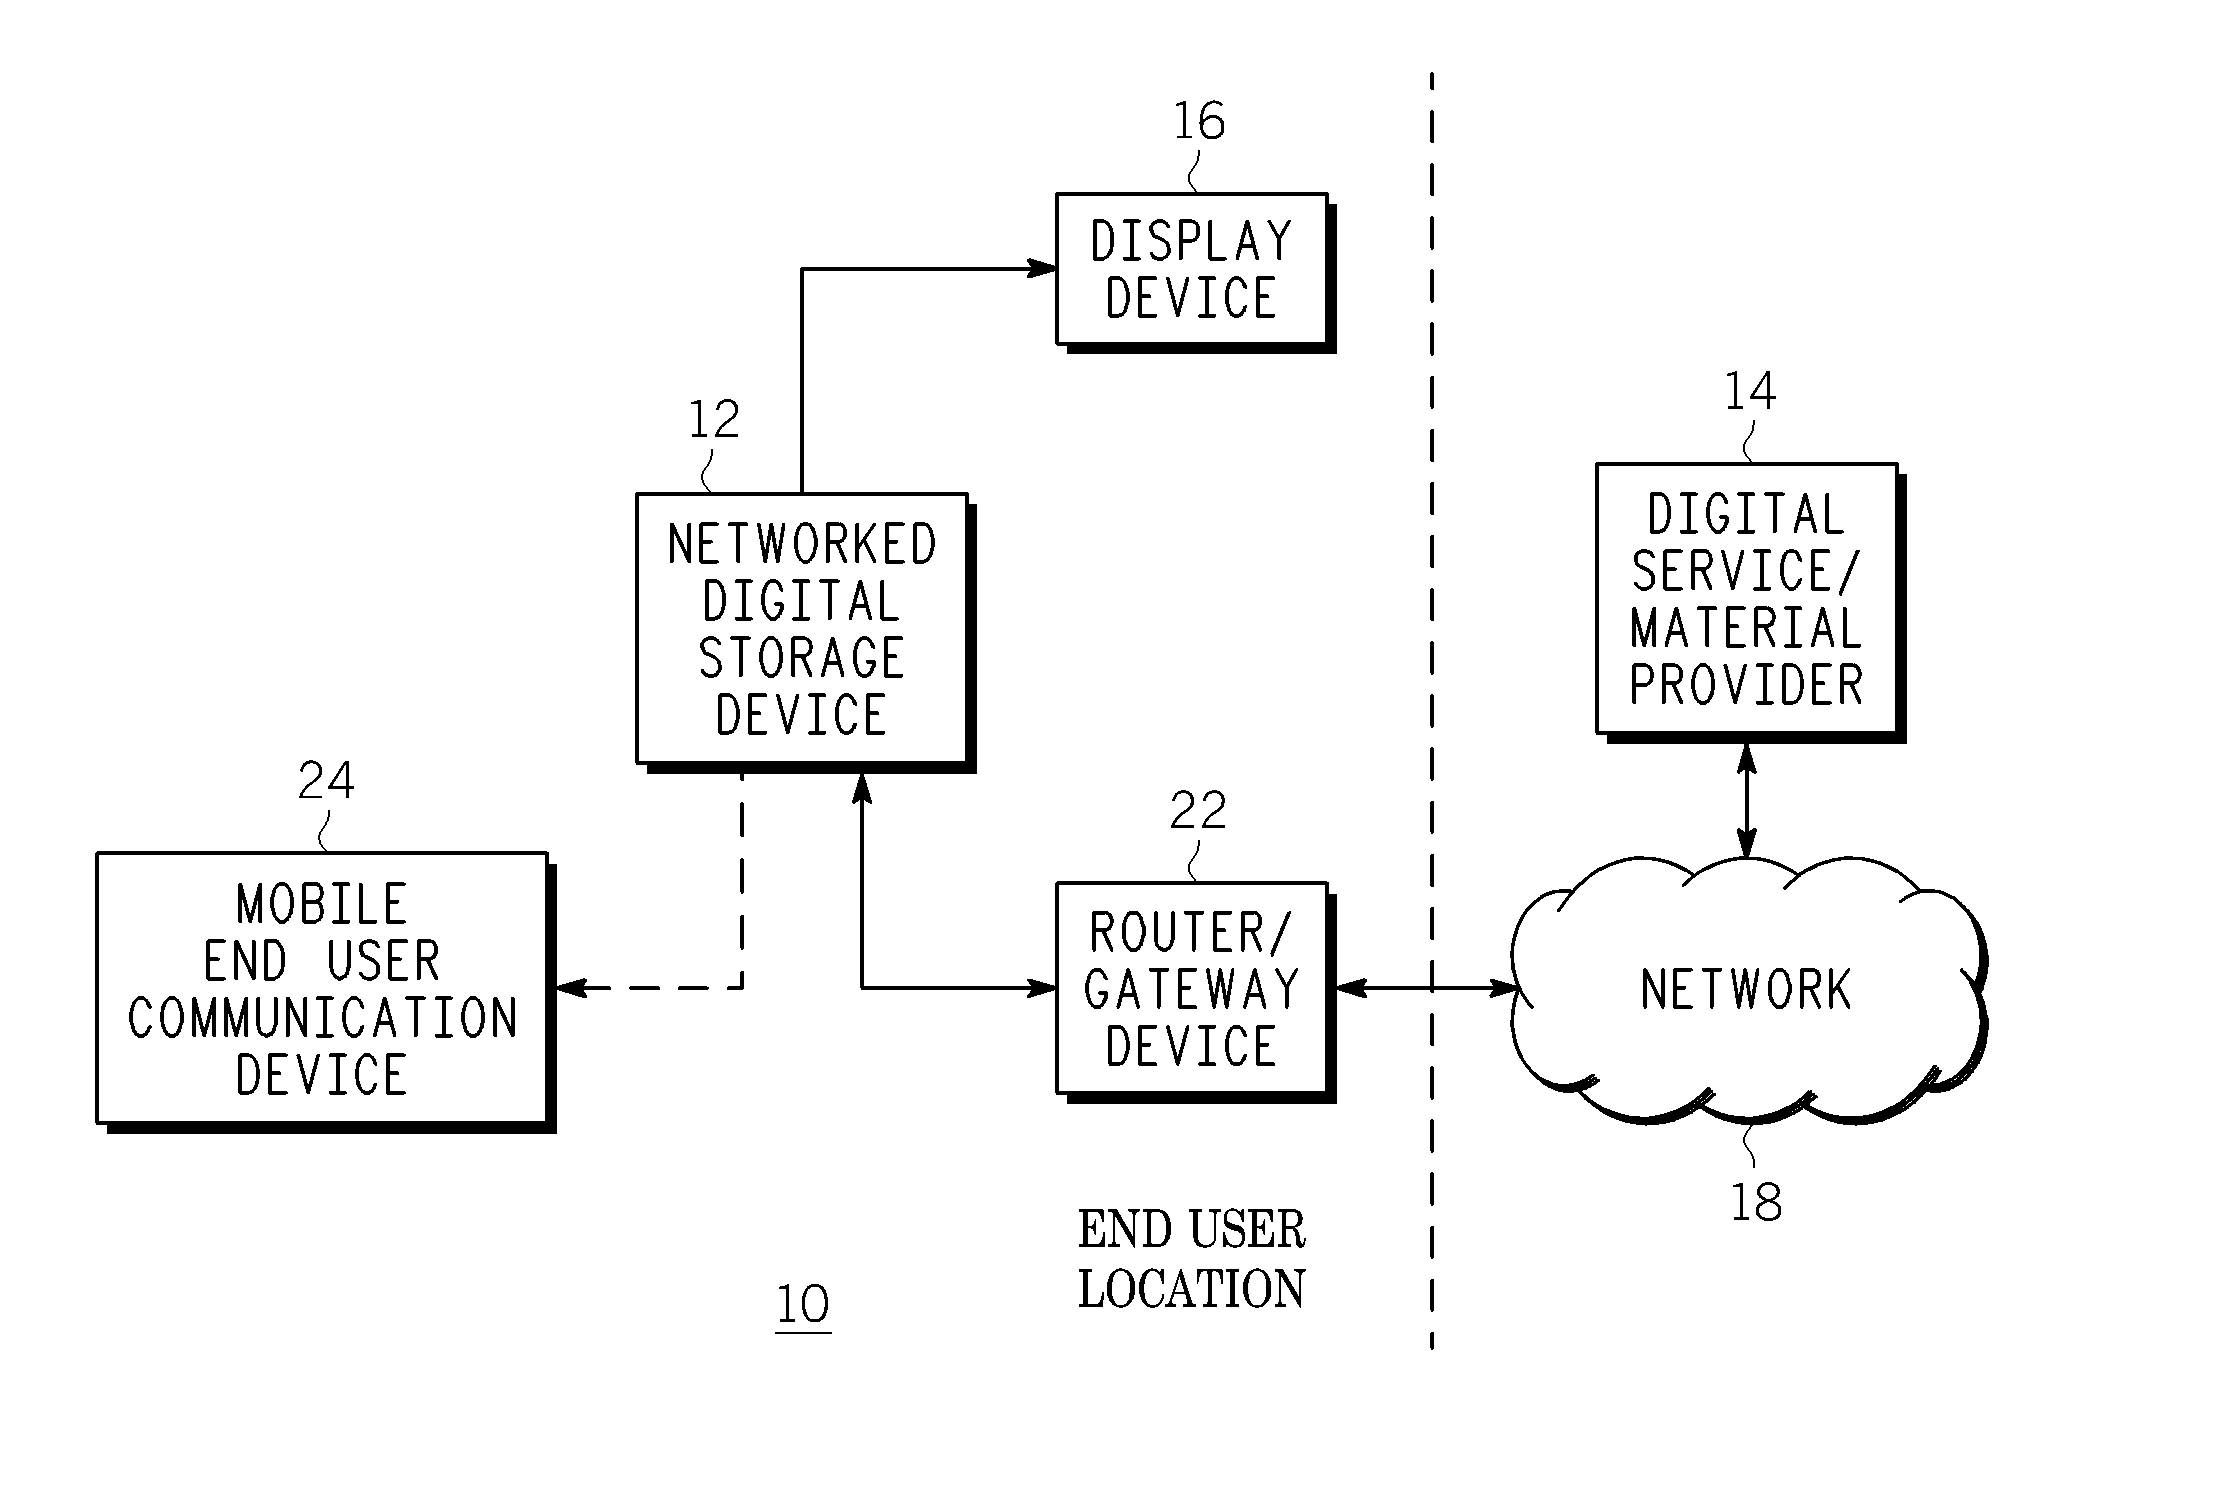 Method, system and device for secured access to protected digital material